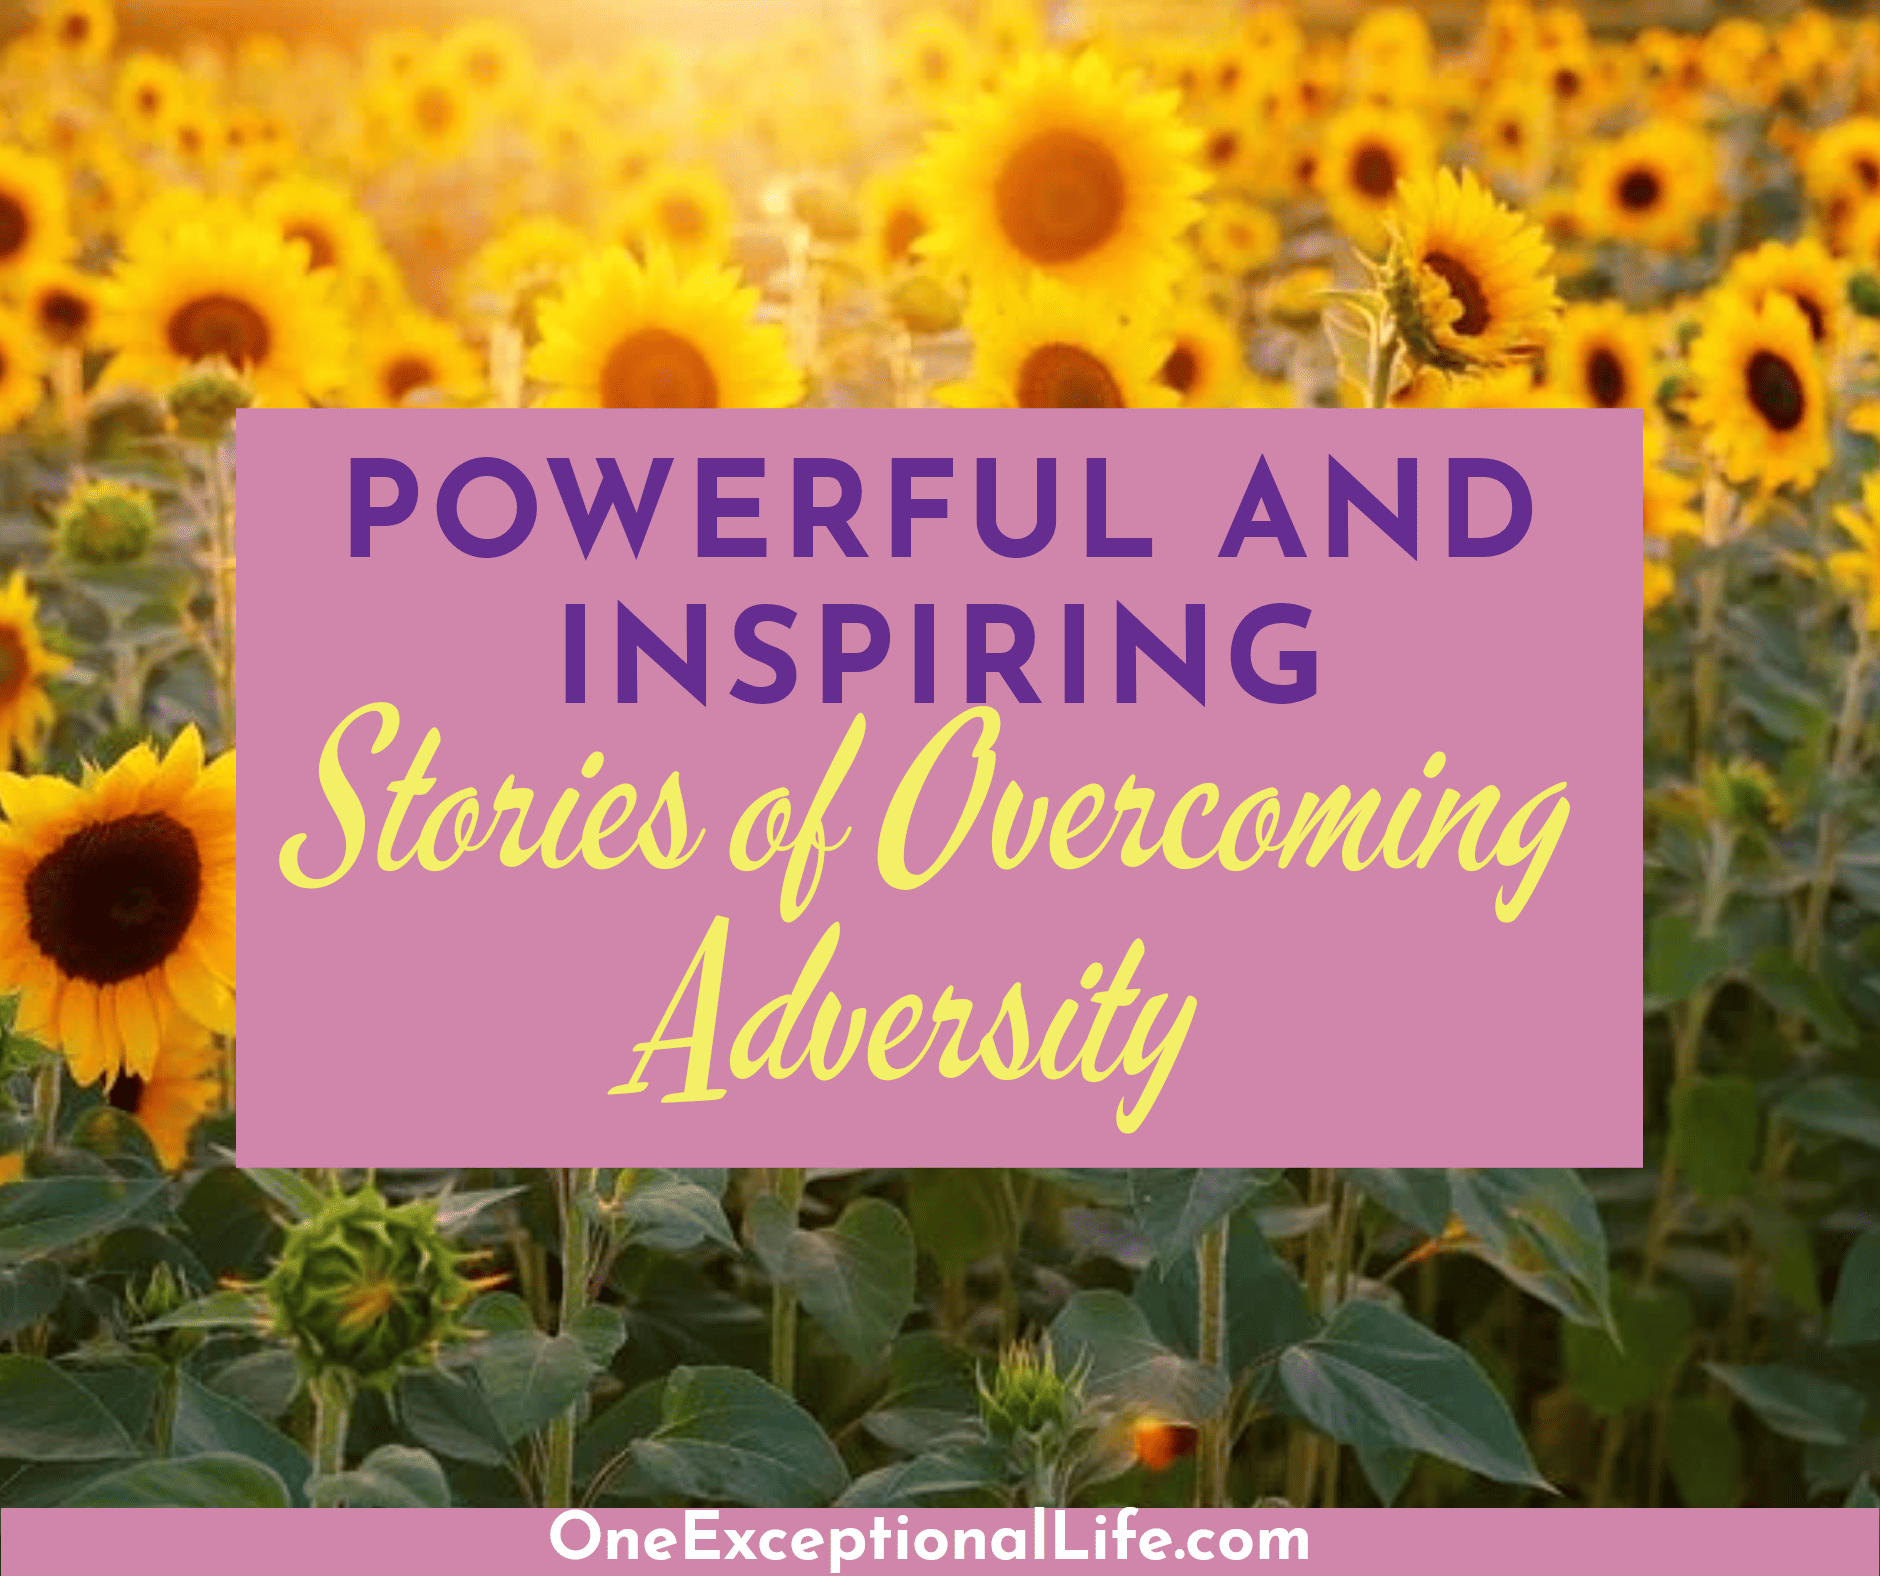 Powerful and Inspiring Stories of Overcoming Adversity